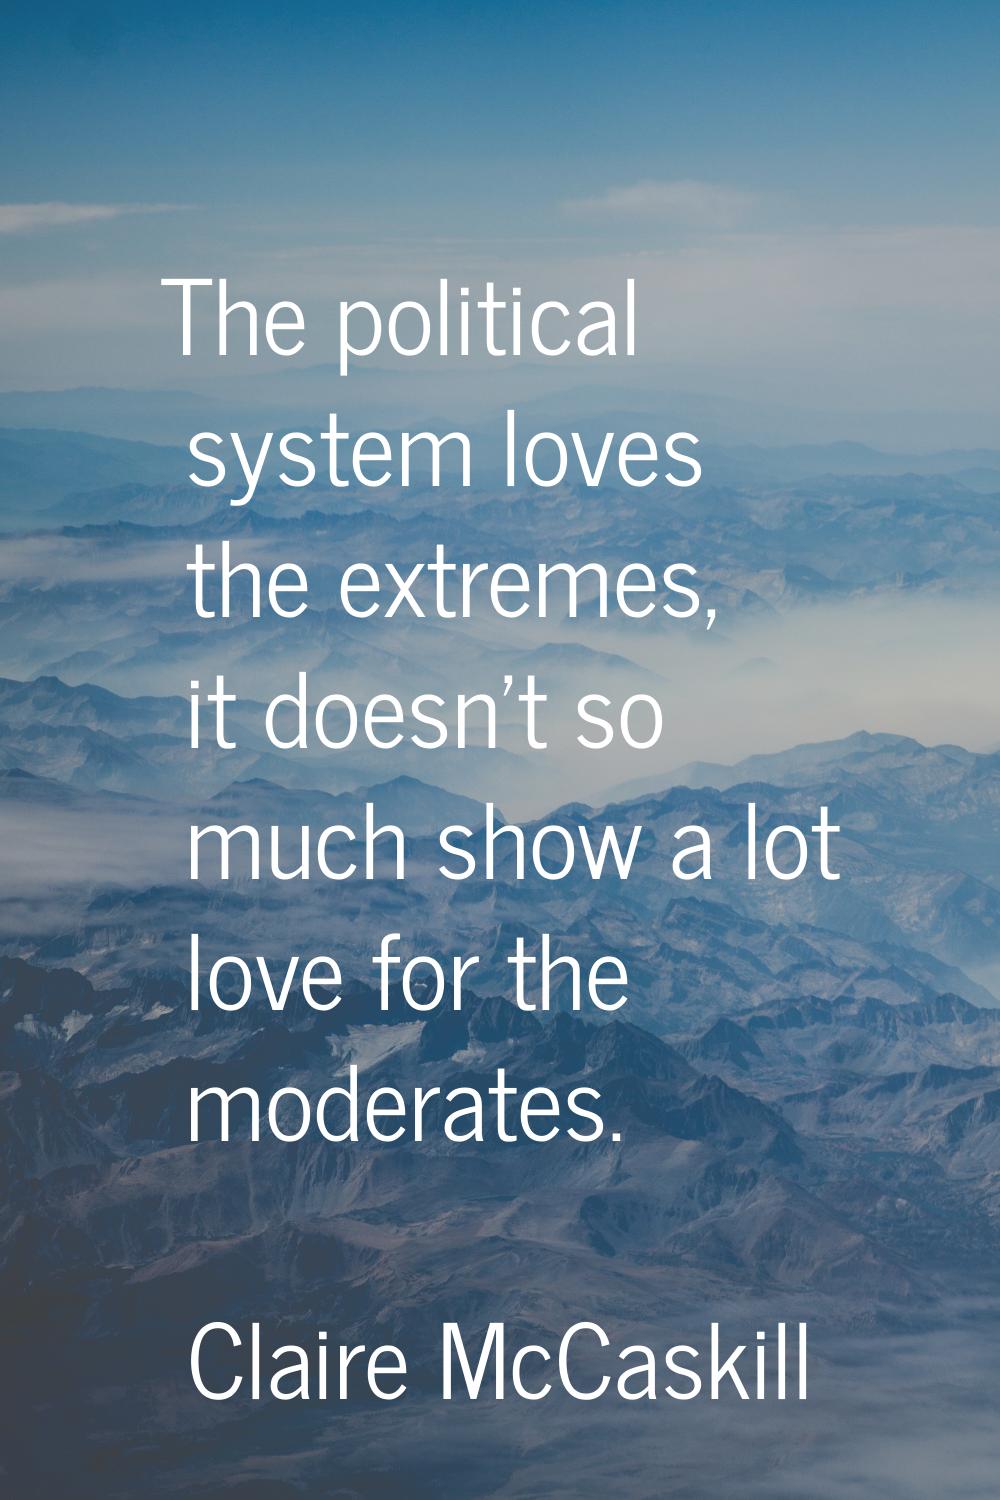 The political system loves the extremes, it doesn't so much show a lot love for the moderates.